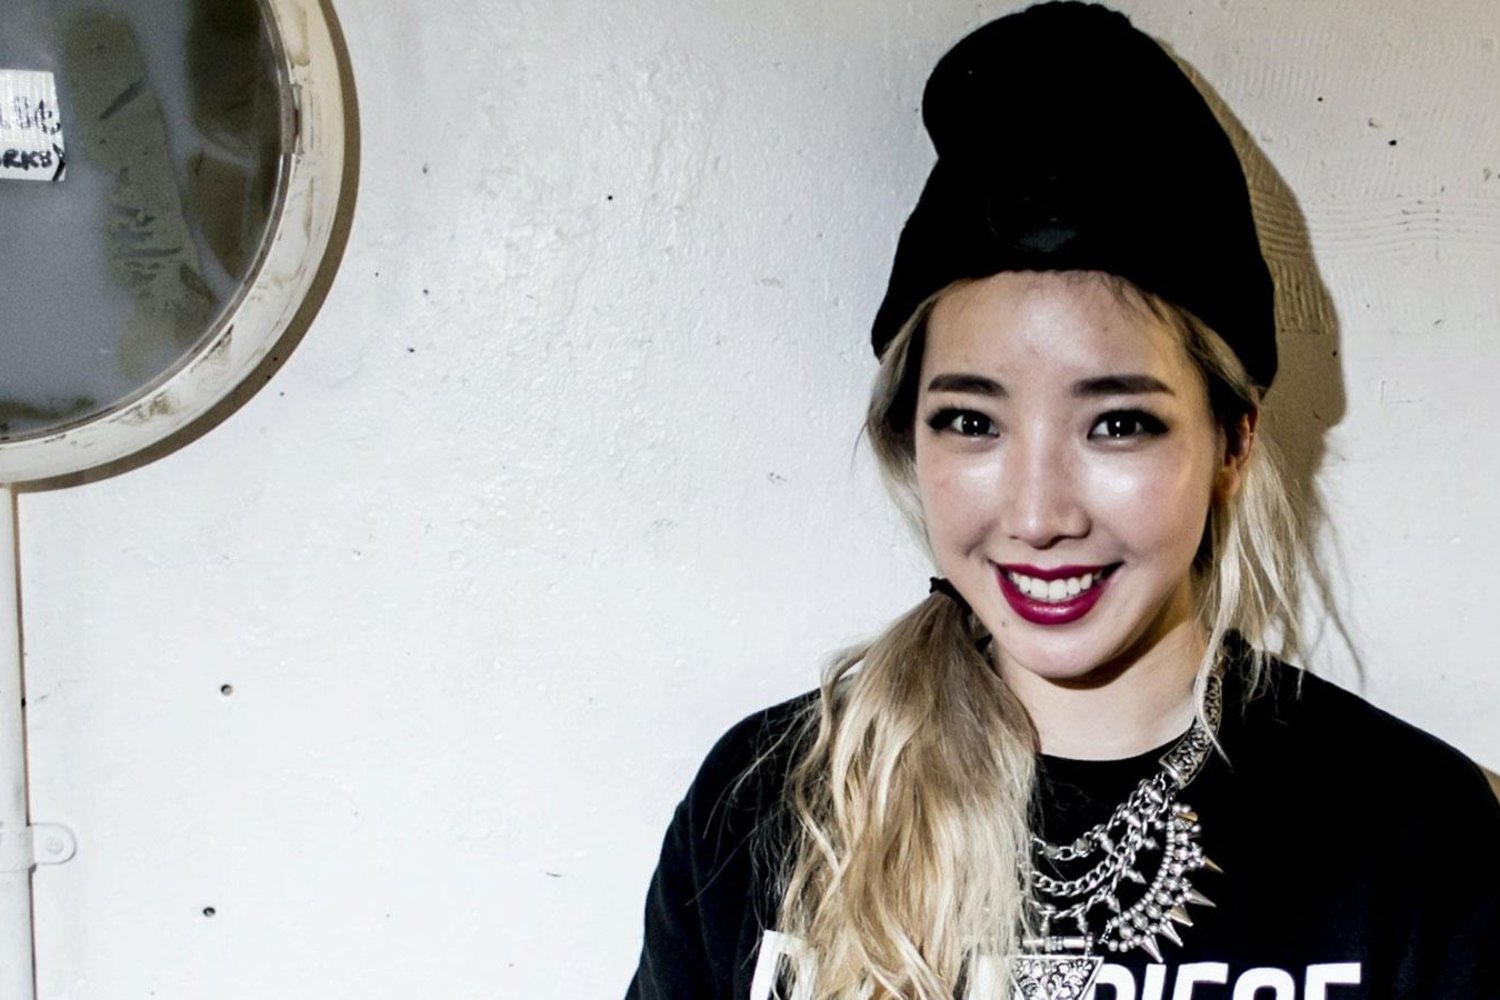 TOKiMONSTA releases “Put It Down,” video from her upcoming album Fovere.